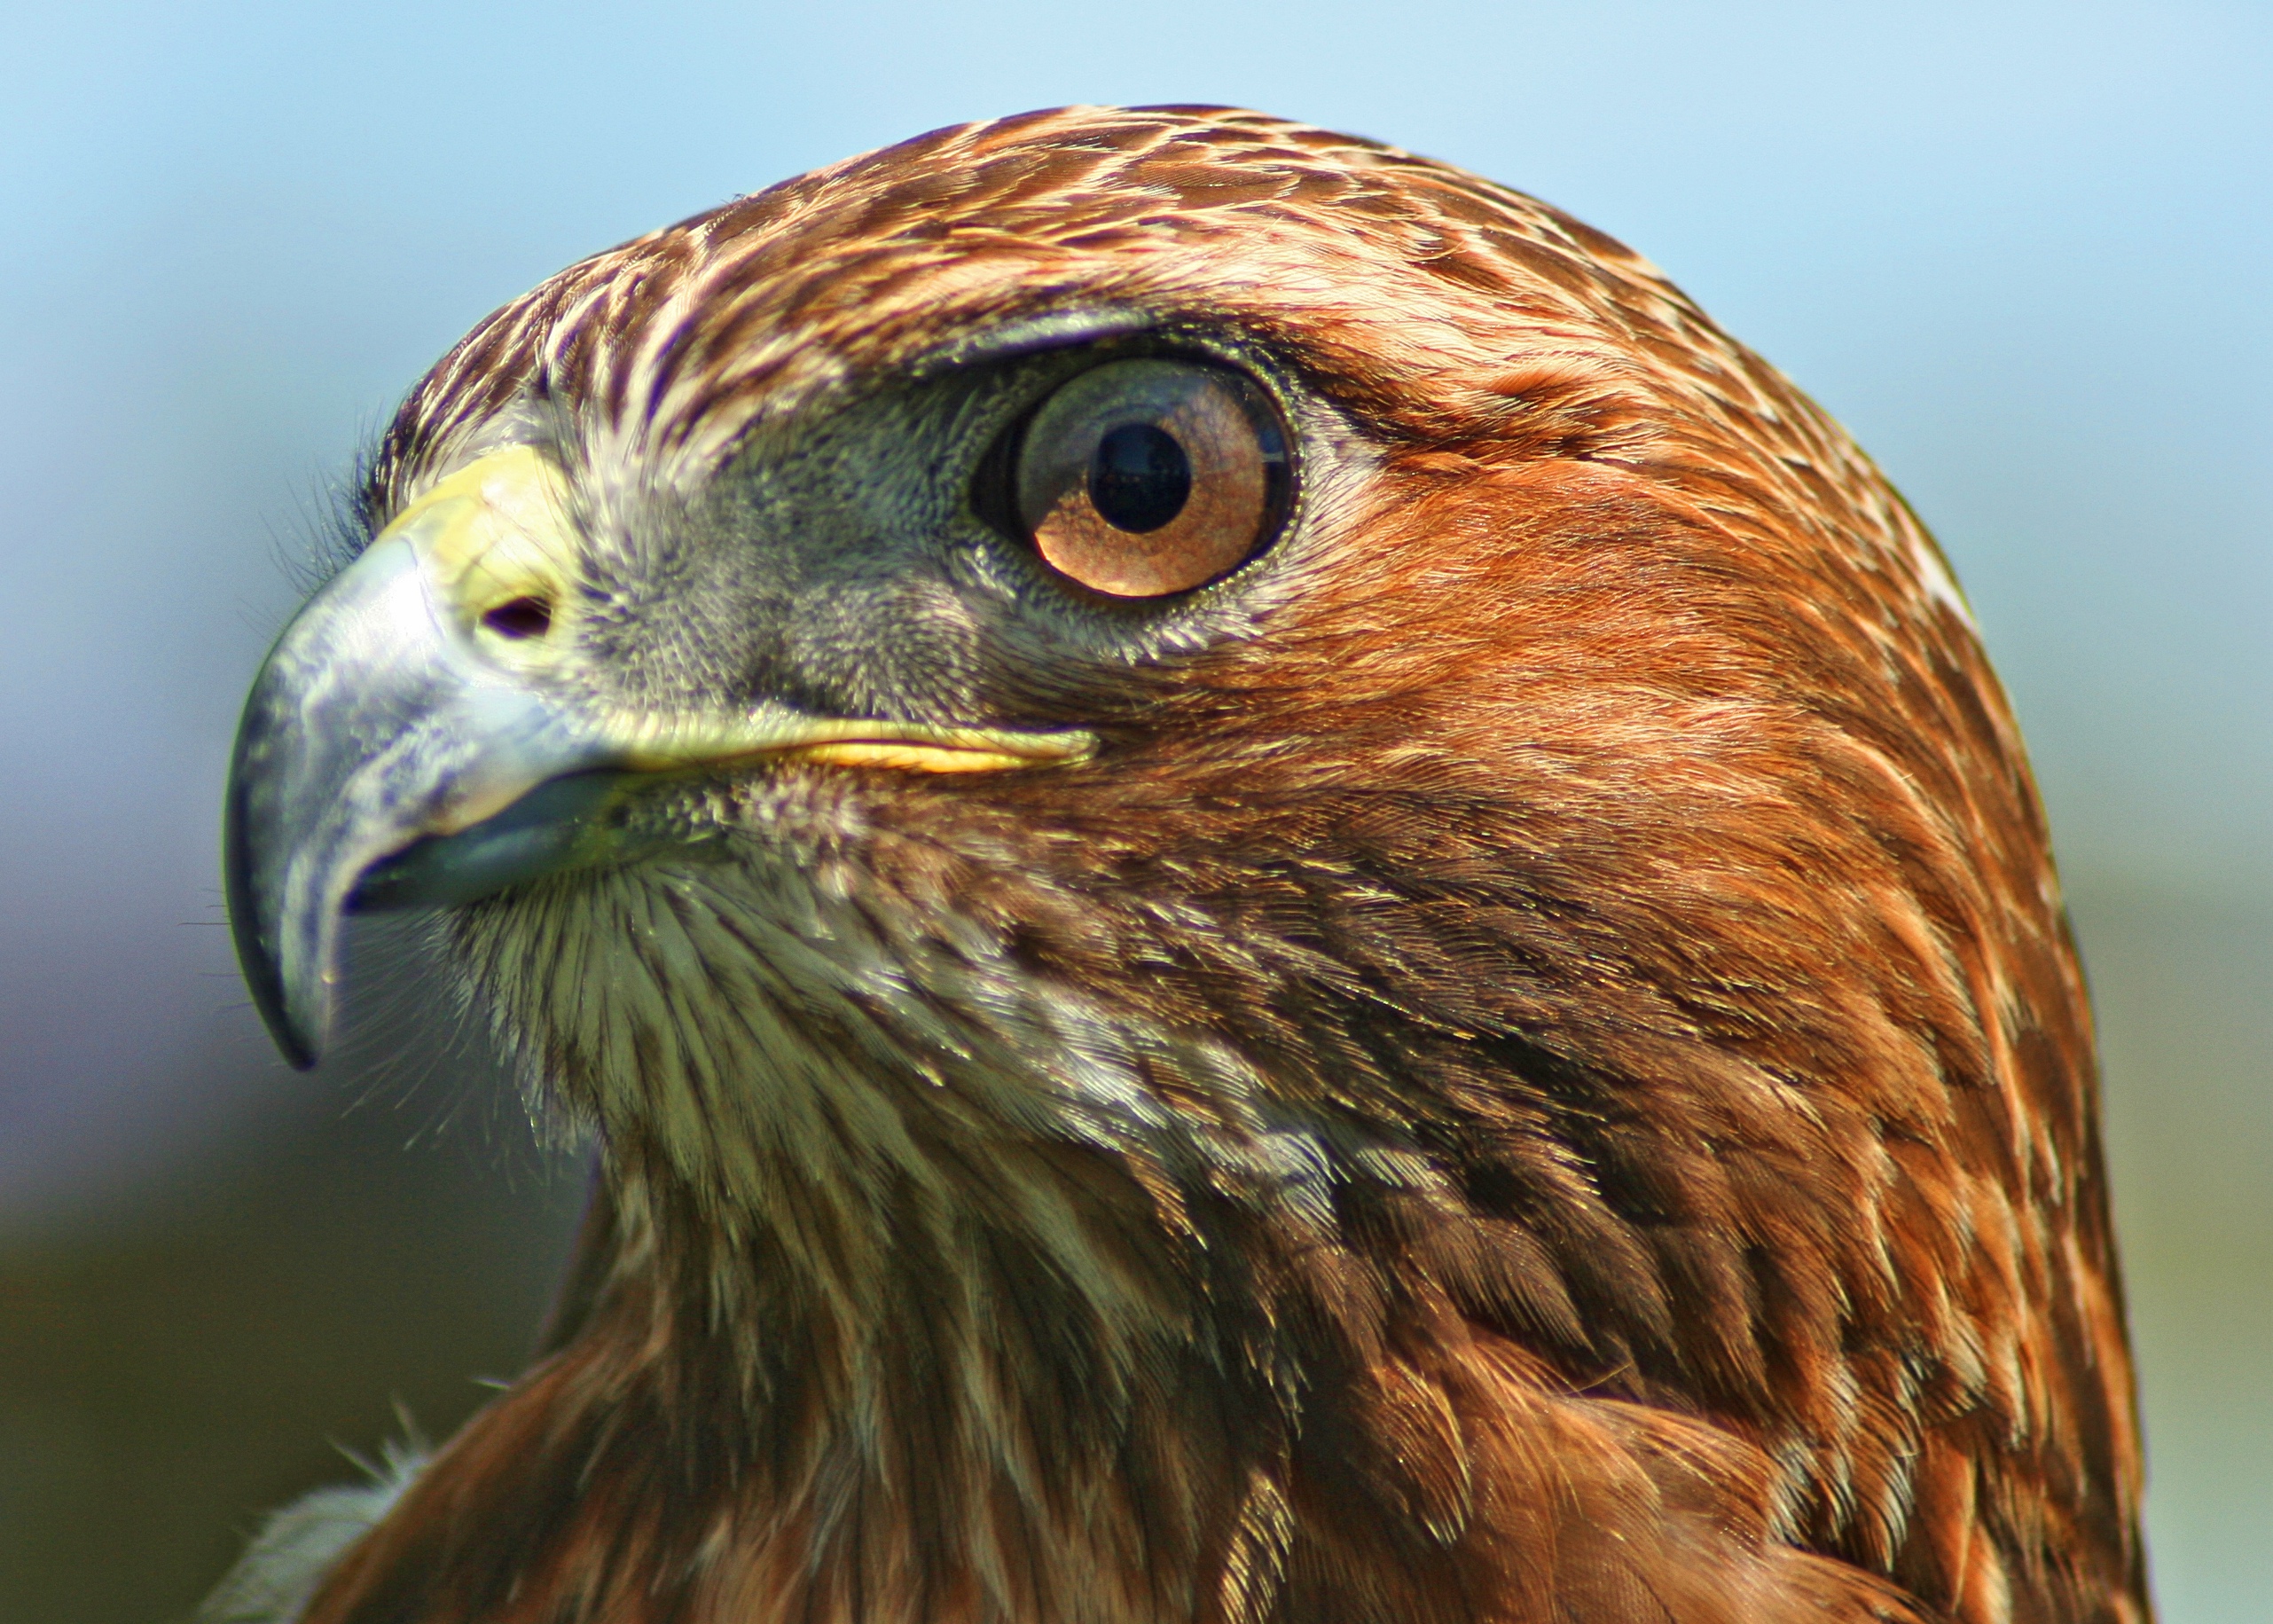 File:Northern-Red-Tailed-Hawk.jpg - Wikimedia Commons